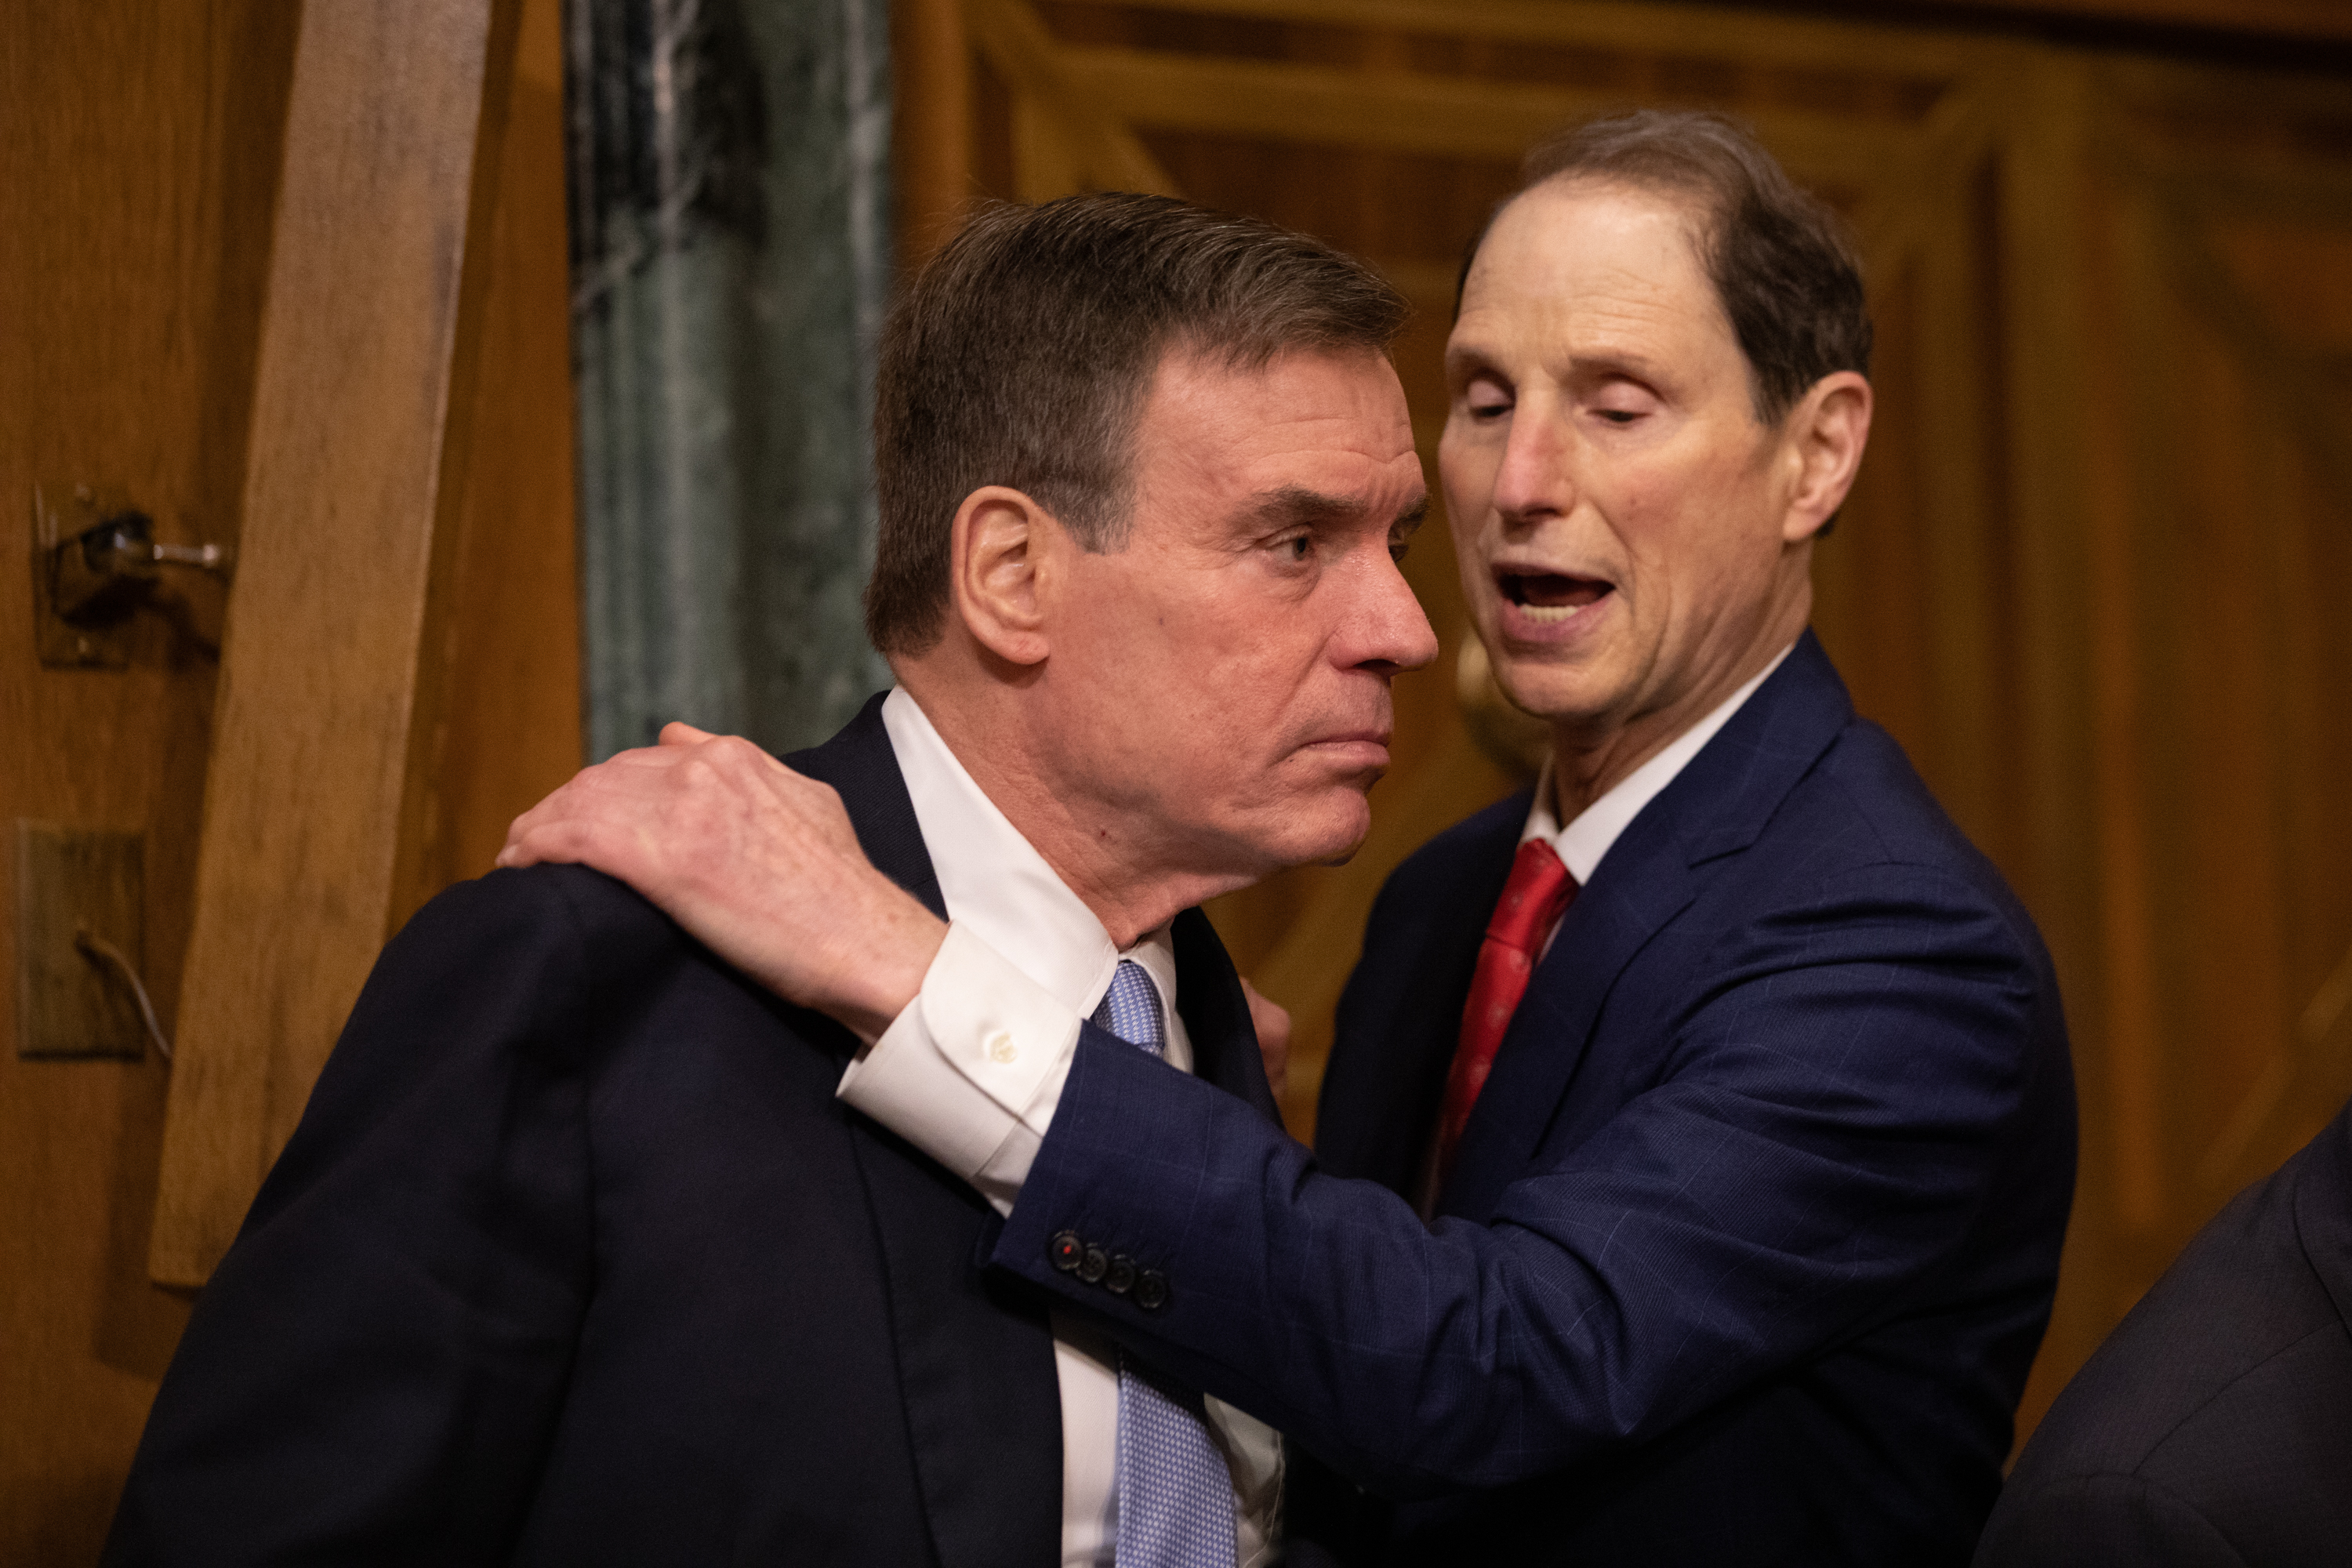 US Senators Ron Wyden and Mark Warner standing close to one another and speaking.